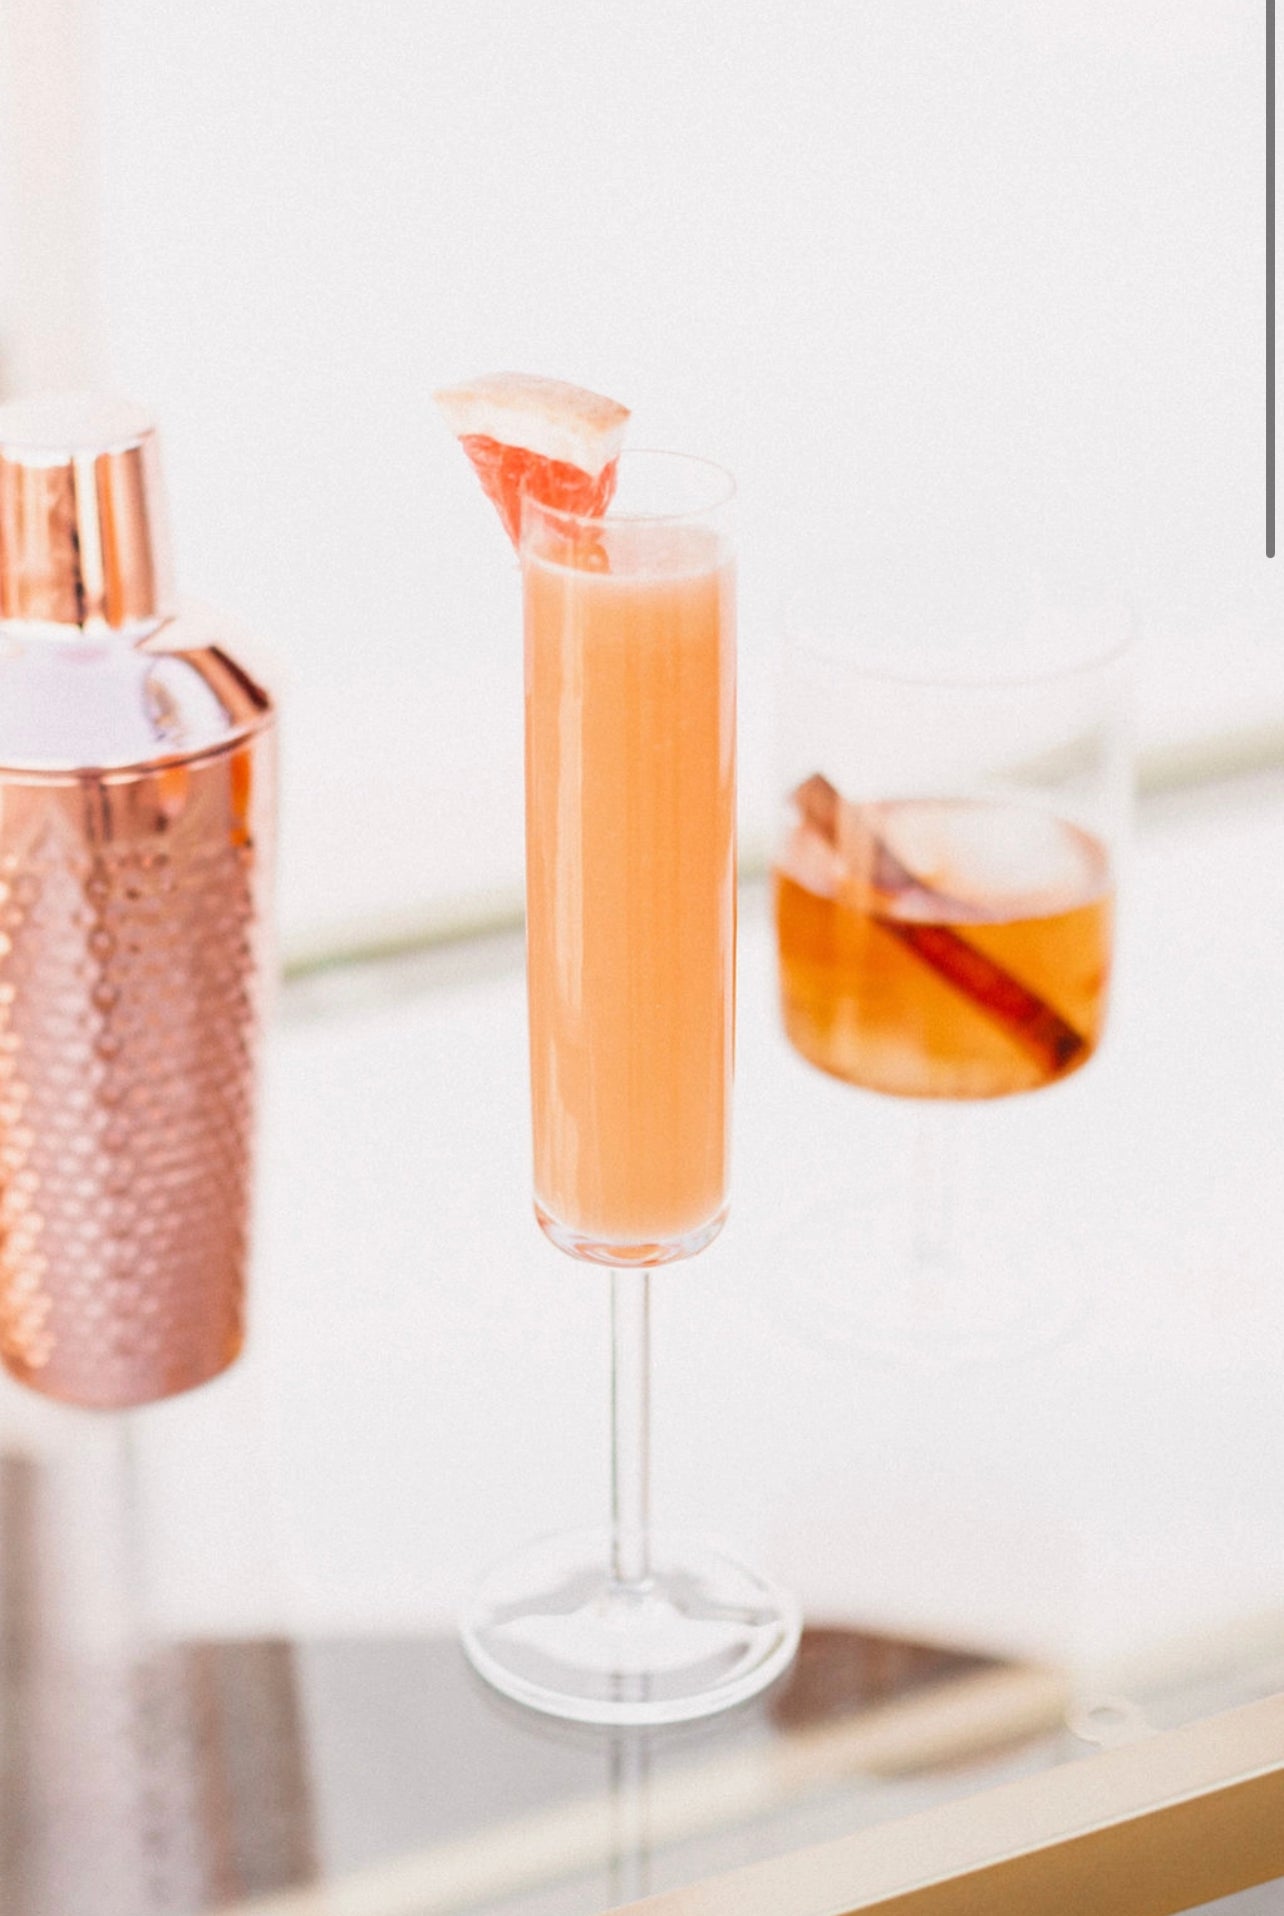 champagne glass and clear stemmed cocktail glass displaying a cocktail made with the Orange Peel and Bitters Mix garnished with a cinnamon stick